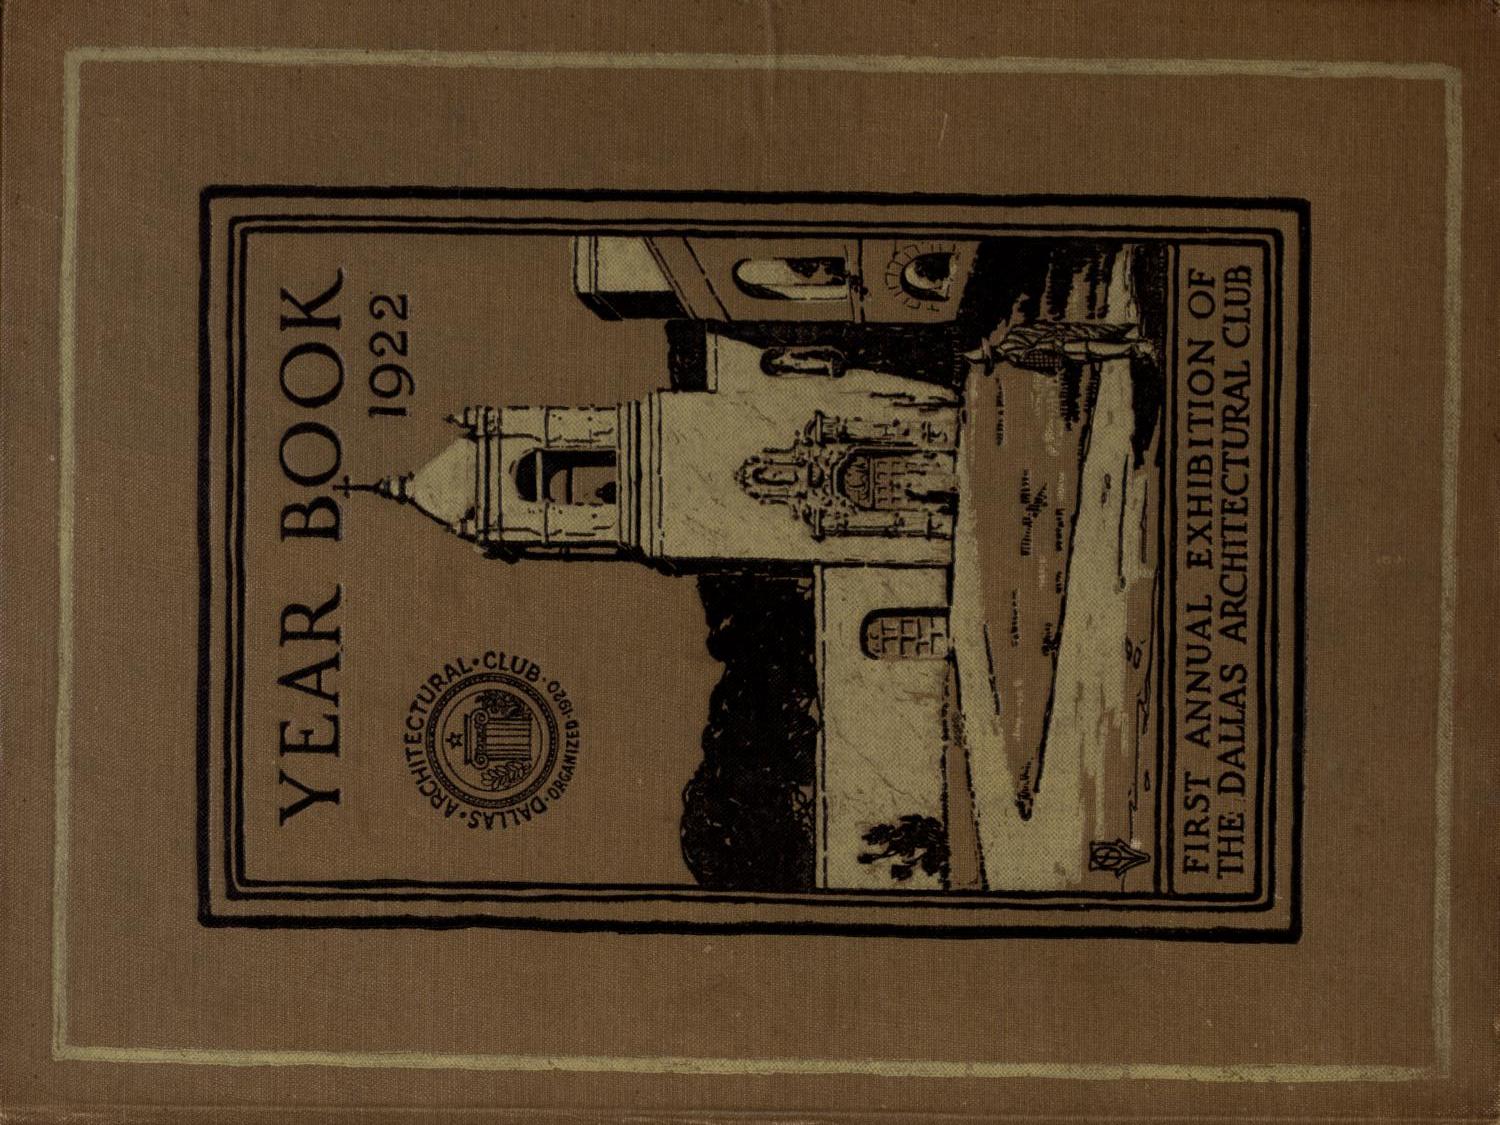 Year book of the Dallas Architectural Club and catalogue of its first annual exhibition : held at the Jefferson Hotel, Dallas, February eleventh to eighteenth, 1922
                                                
                                                    Front Cover
                                                